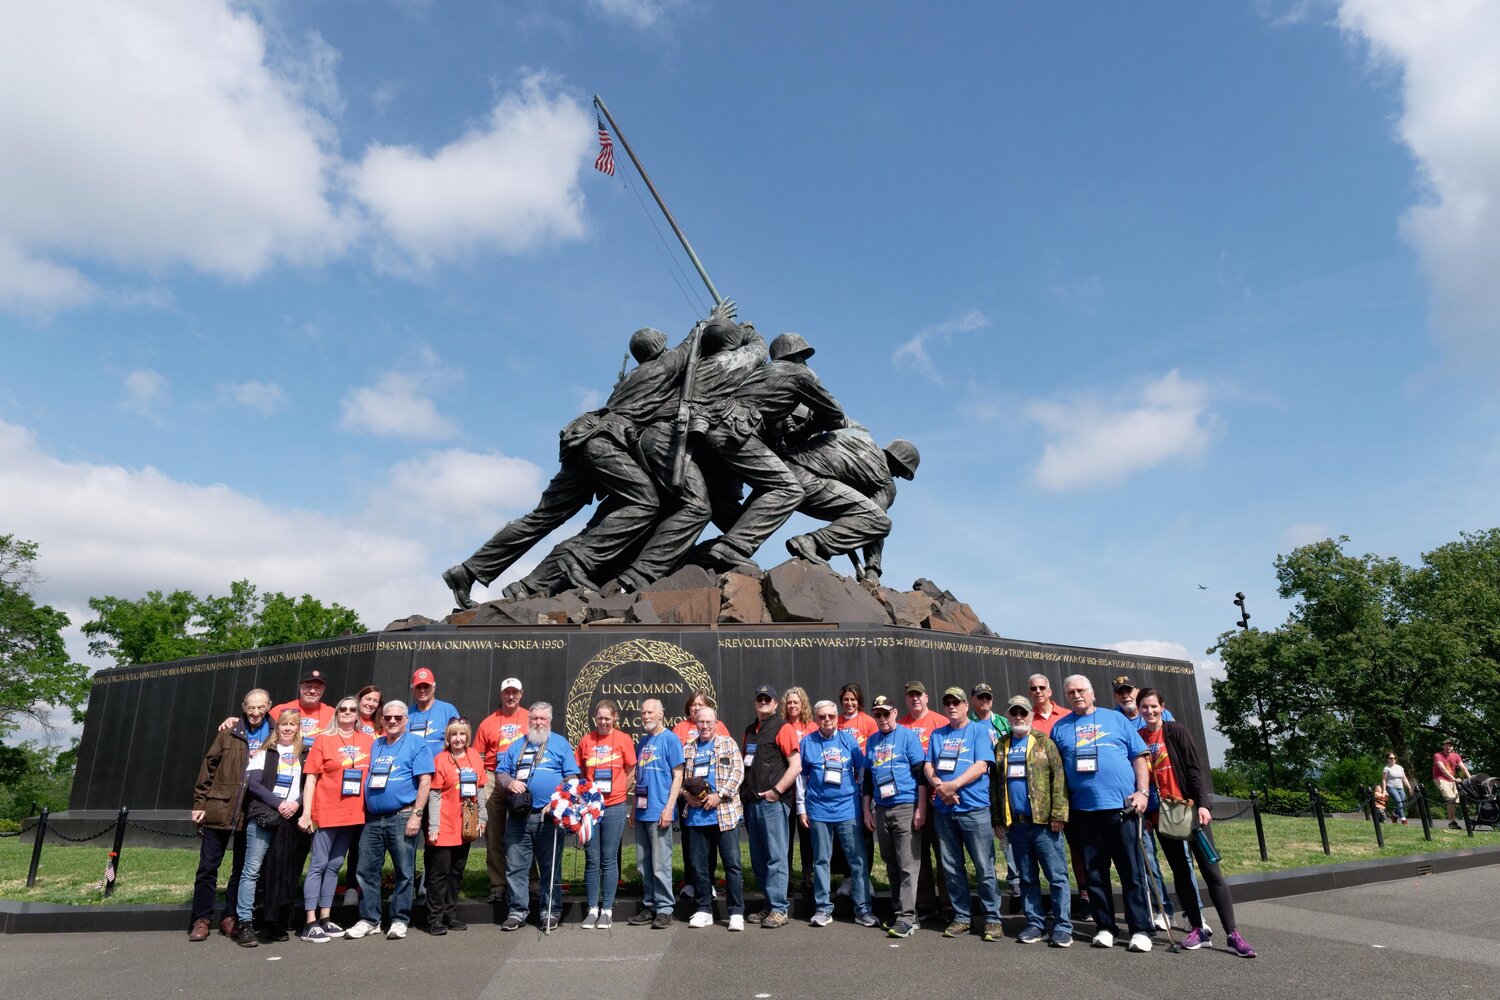 Veterans from World War II, the Korean War and Vietnam were treated to a trip to Washington last Saturday by Honor Flight Long Island. One stop the 47 veterans made was at the U.S. Marine Corps War Memorial.